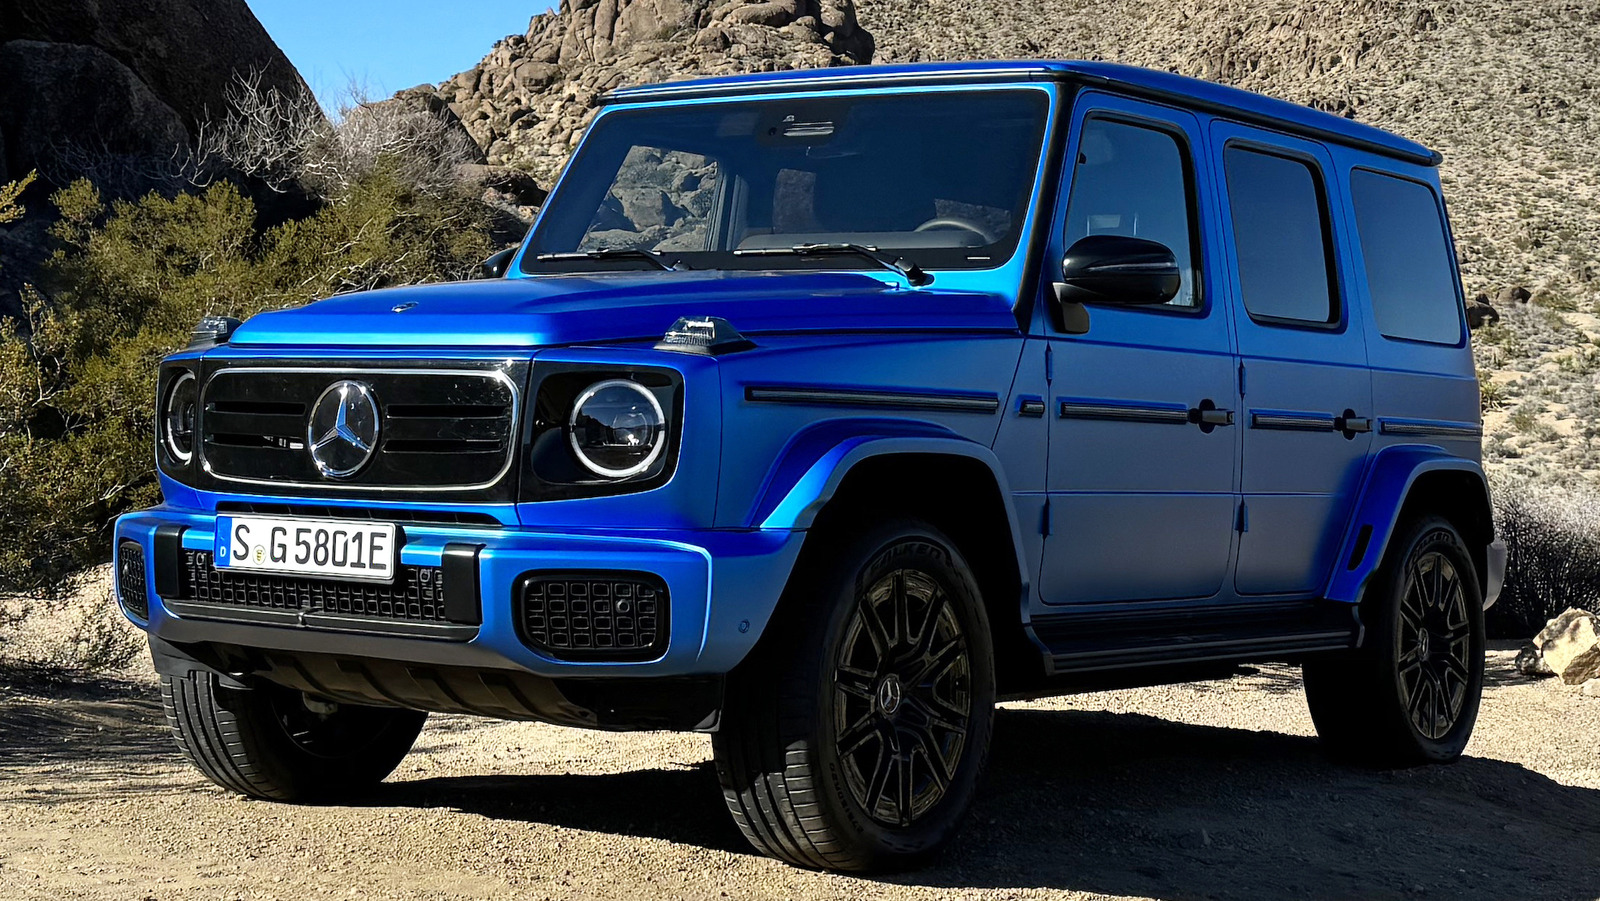 2025 Mercedes G 580 Revealed: What The Fully Electric G-Wagon Does With Four Motors – SlashGear